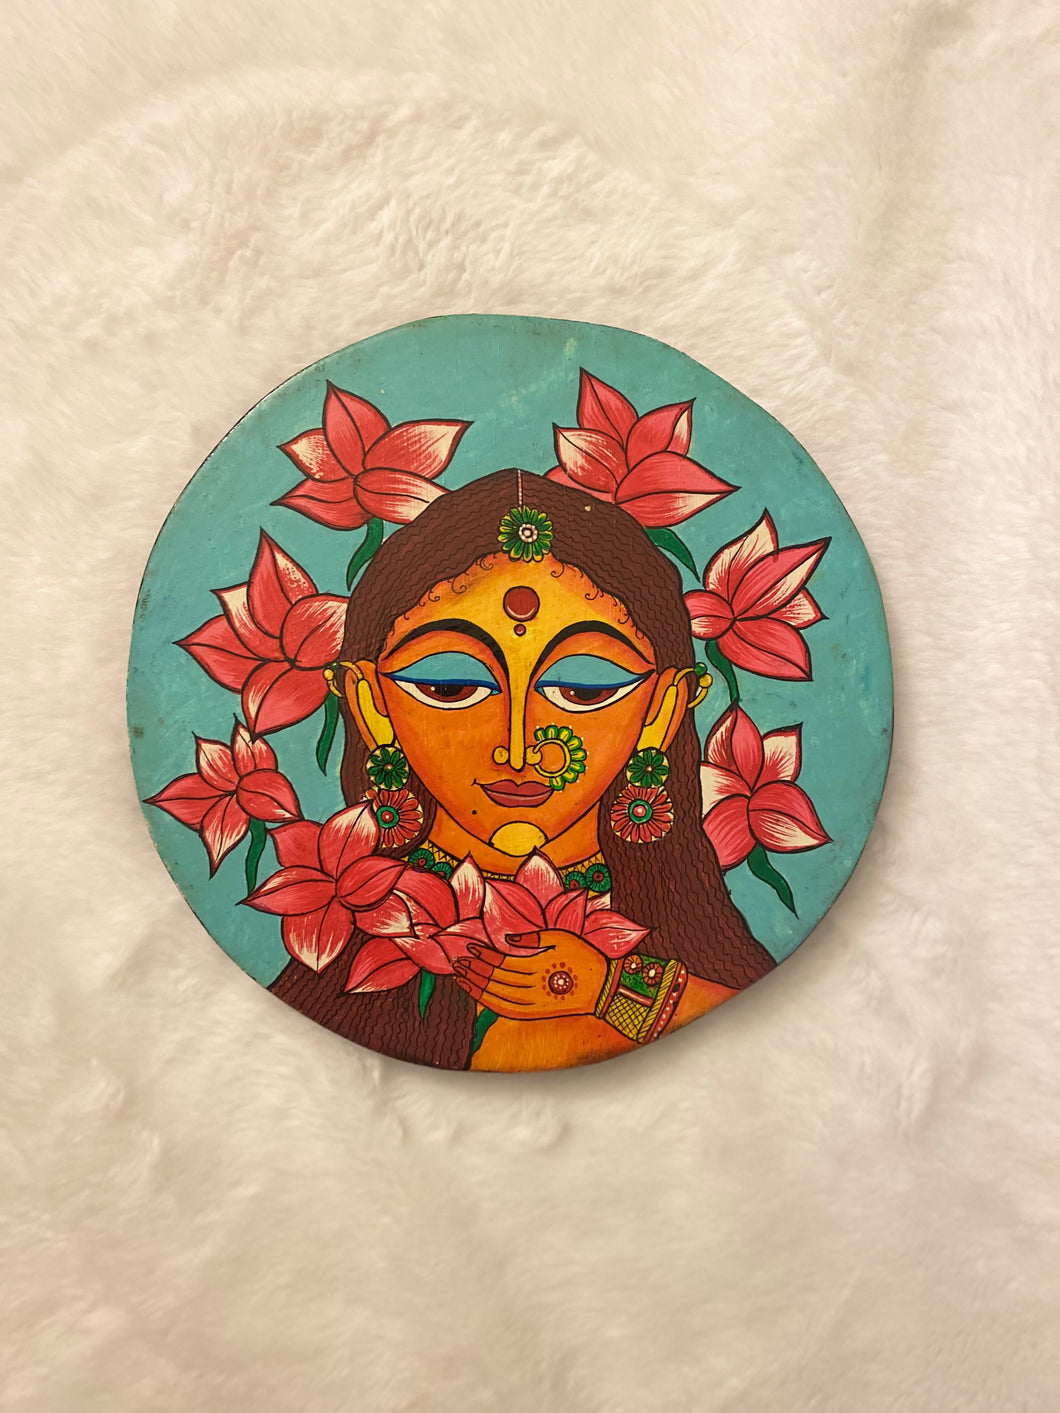 Handcrafted Hand painted Natural Solid Wood Wall Hanging Plate for home decor, wedding gift, housewarming gift of The Lotus Woman in wood art